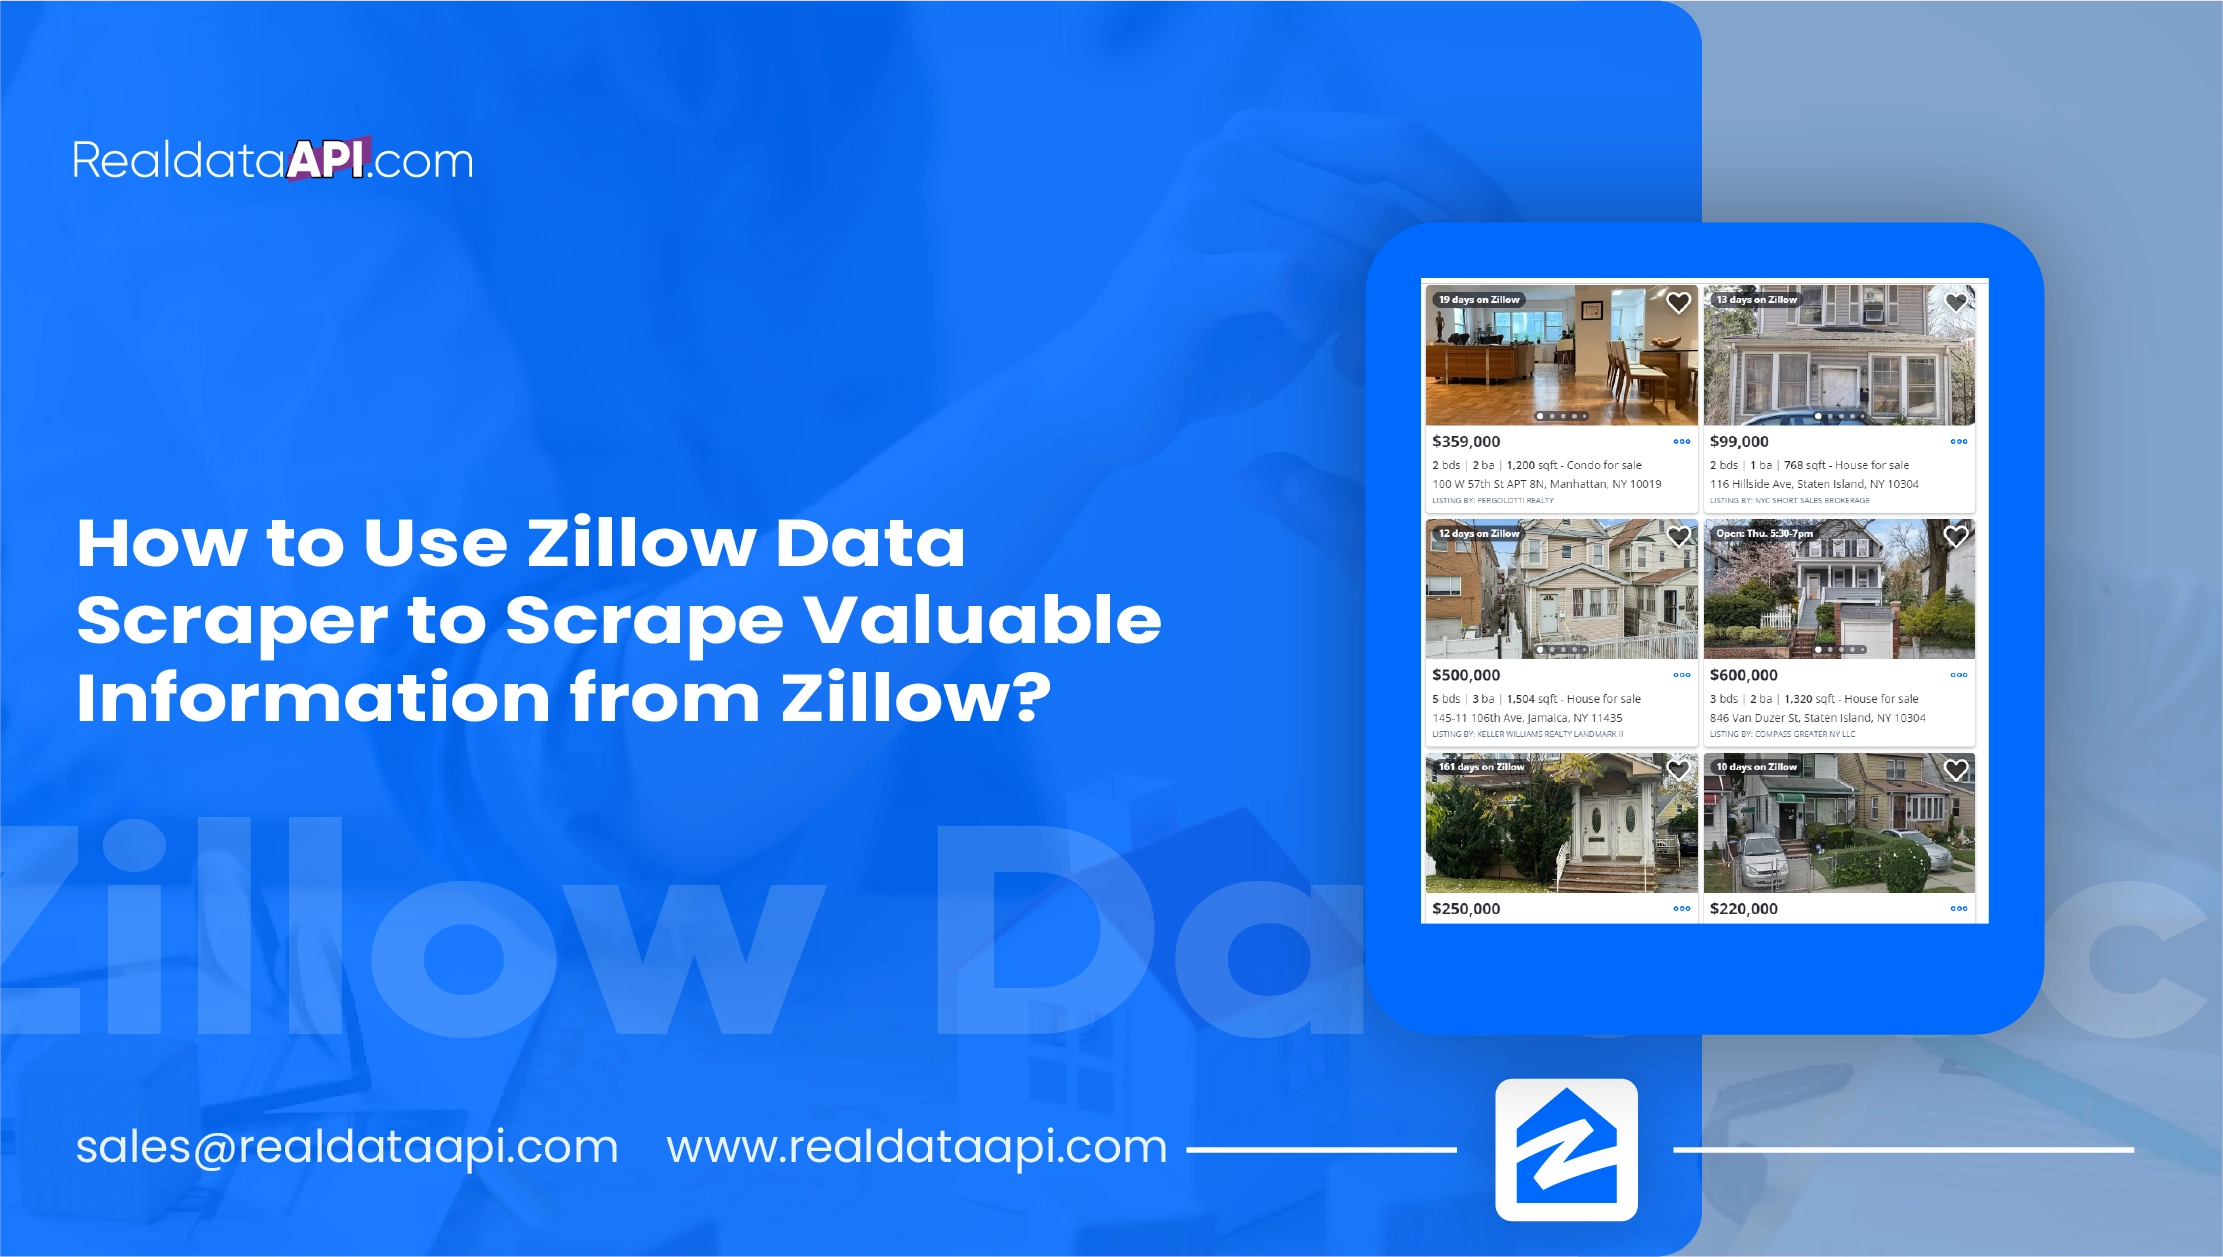 How to Use Zillow Data Scraper to Scrape Valuable Information from Zillow-01